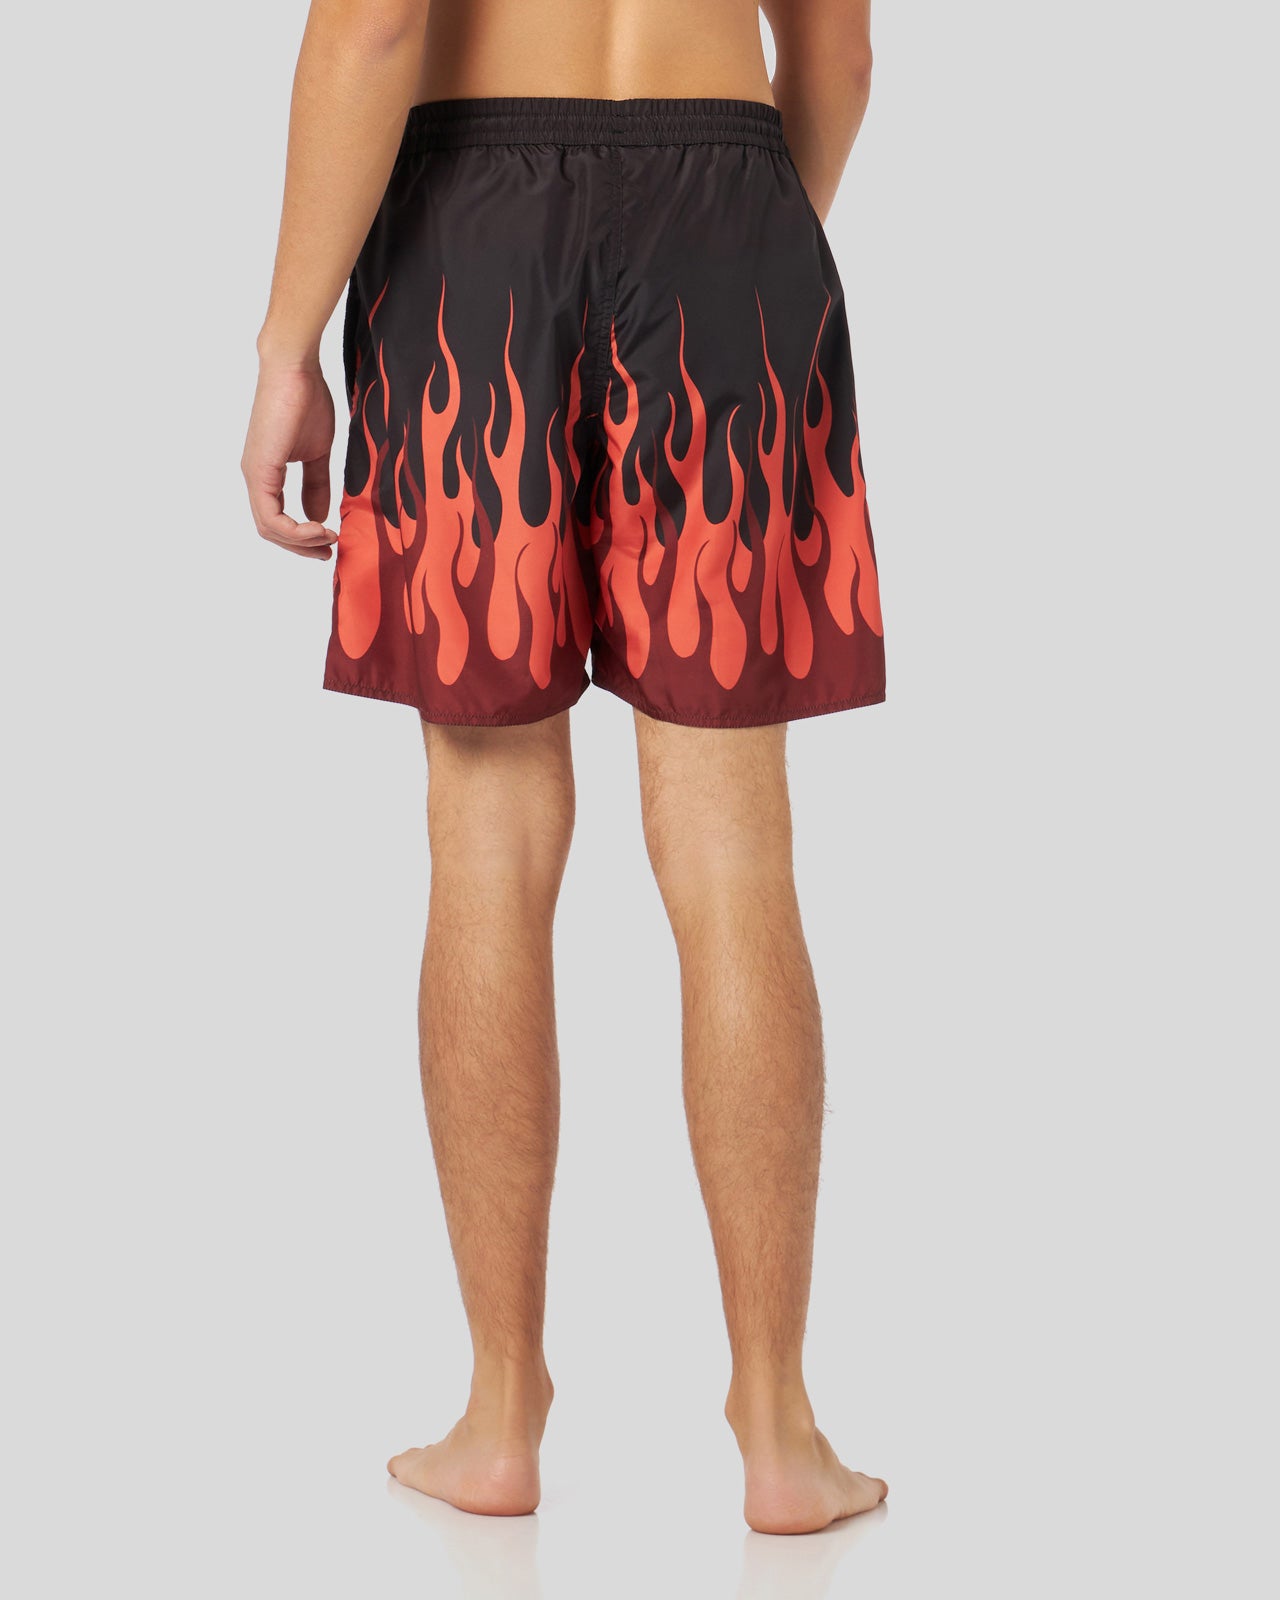 BLACK SWIMWEAR WITH DOUBLE RED FLAMES